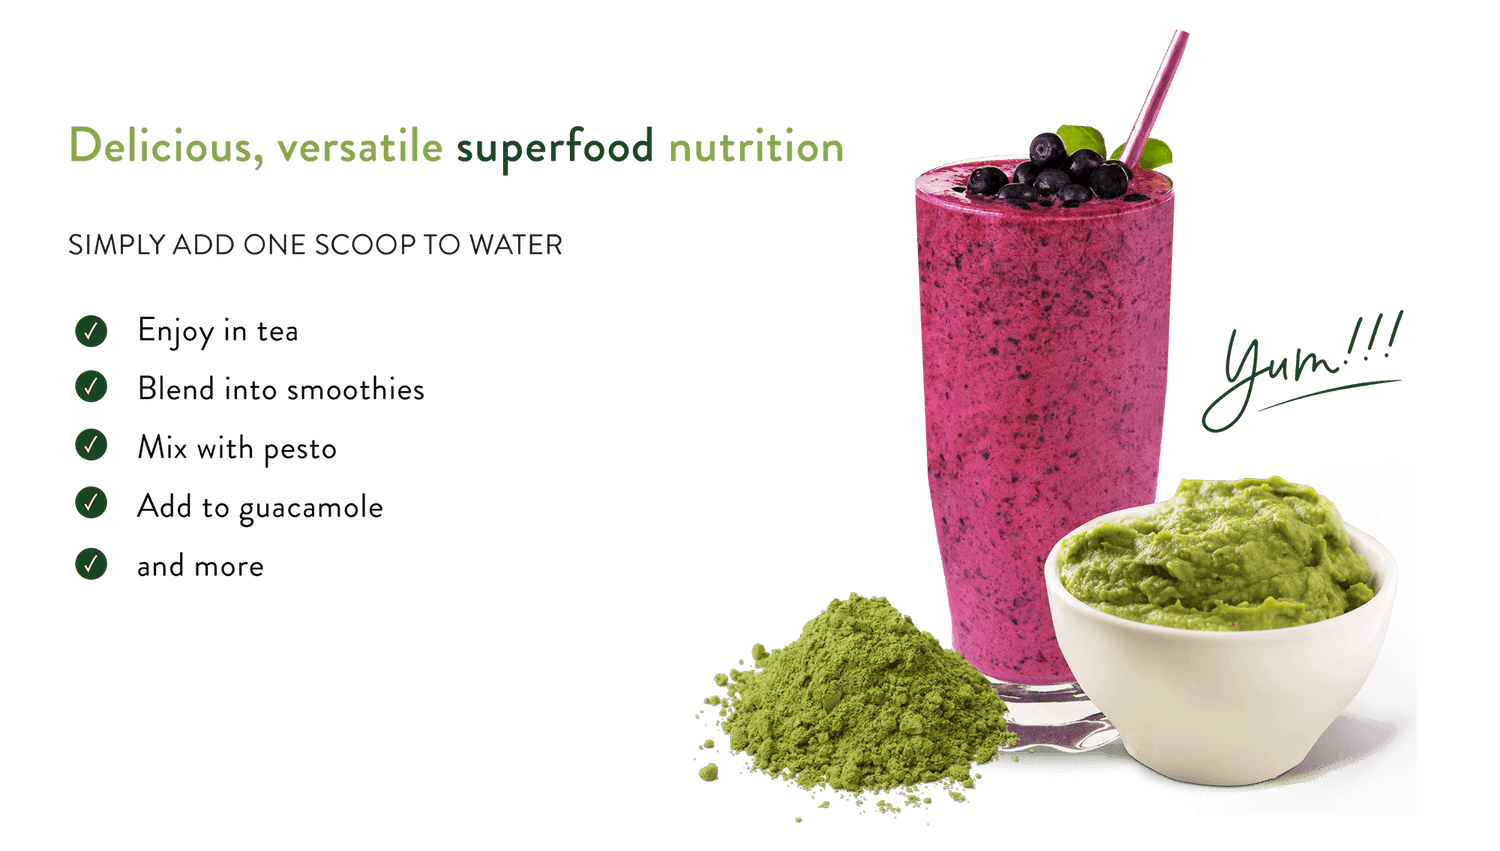 Delicious Versatile superfood nutrition. Simply add one scoop to water. Enjoy in tea, blend into smoothies, mix with pesto, add to guacamole, and more